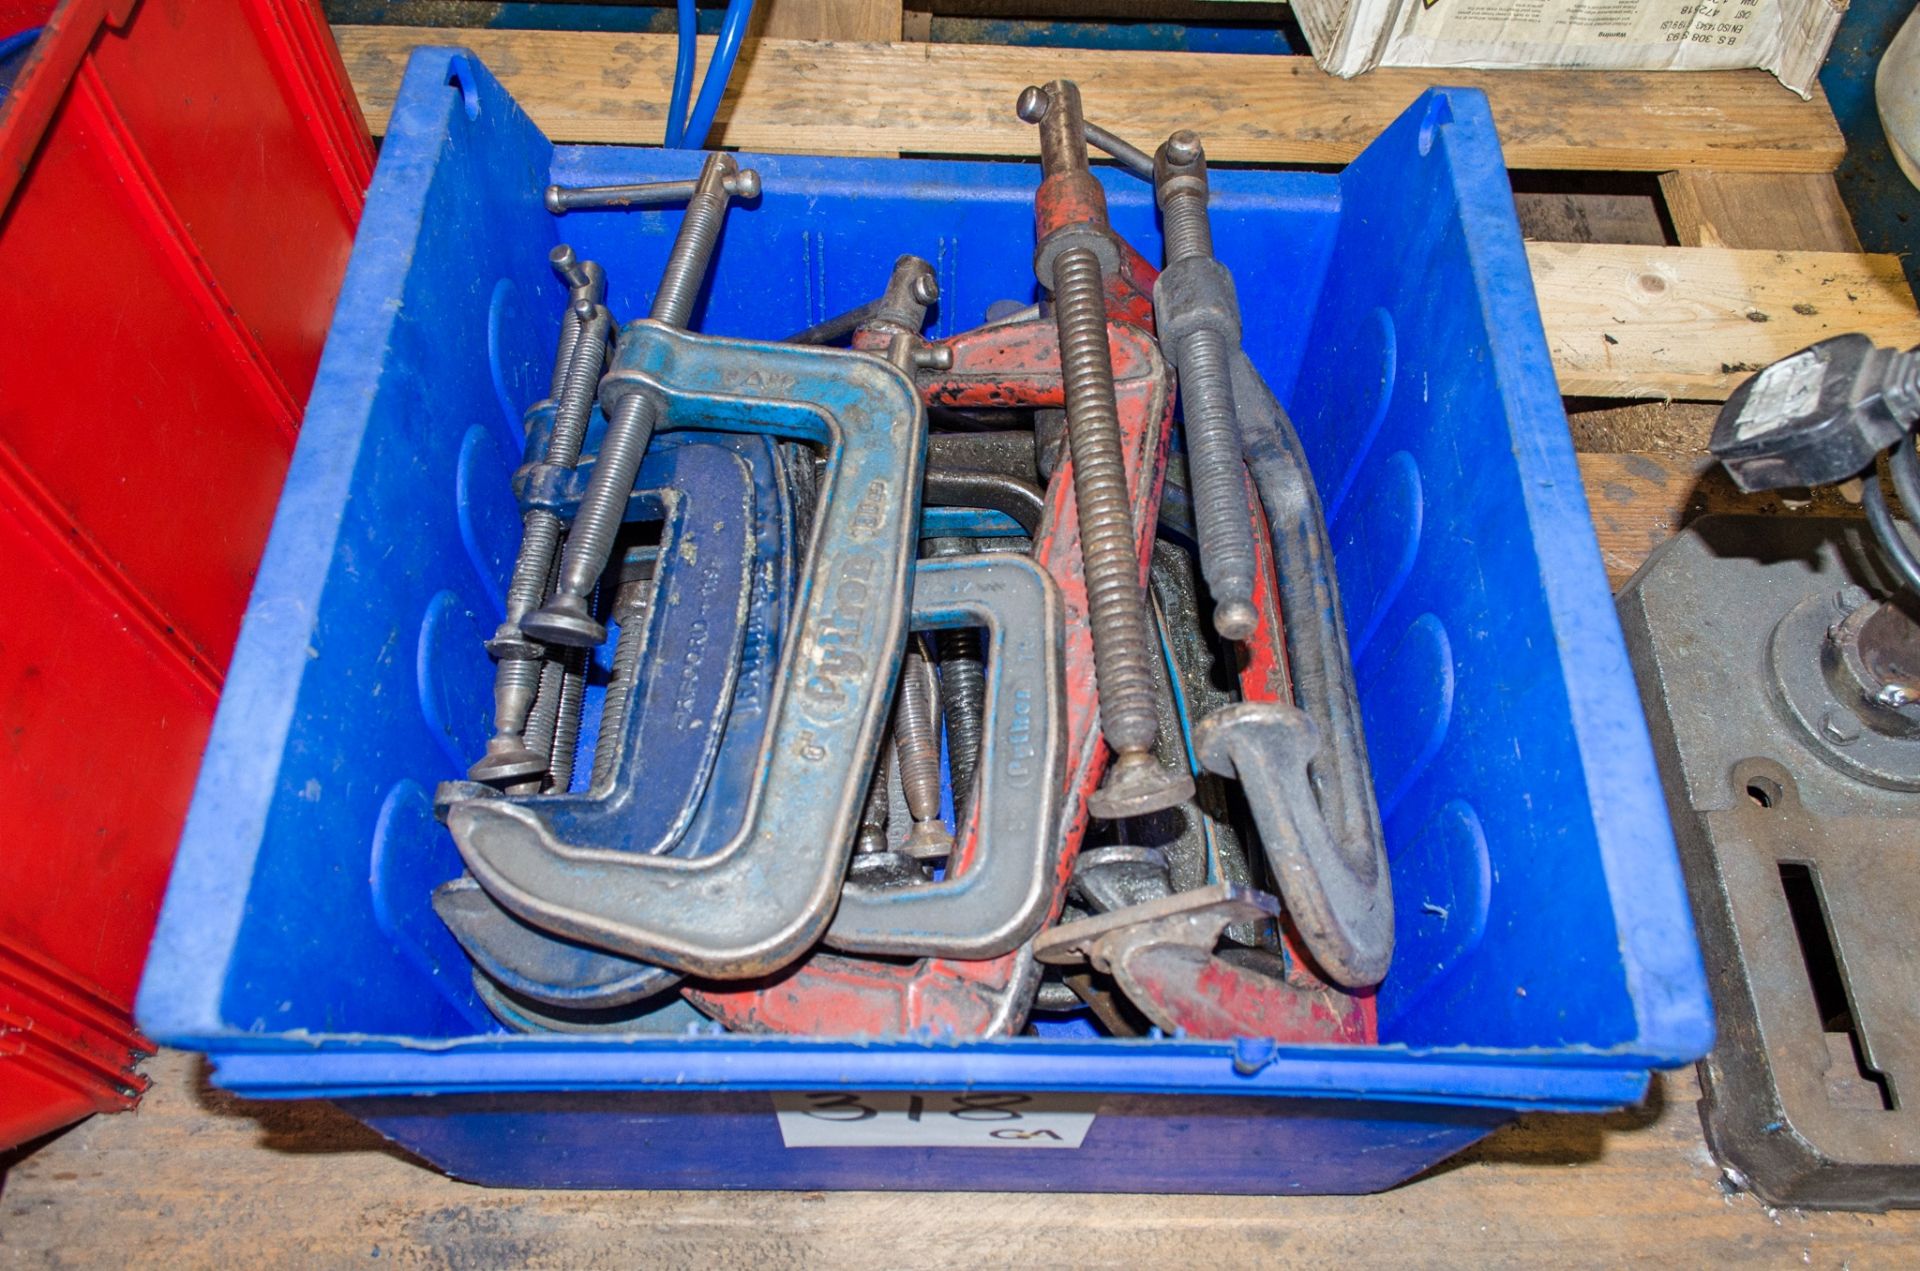 Quantity of g-clamps as photographed